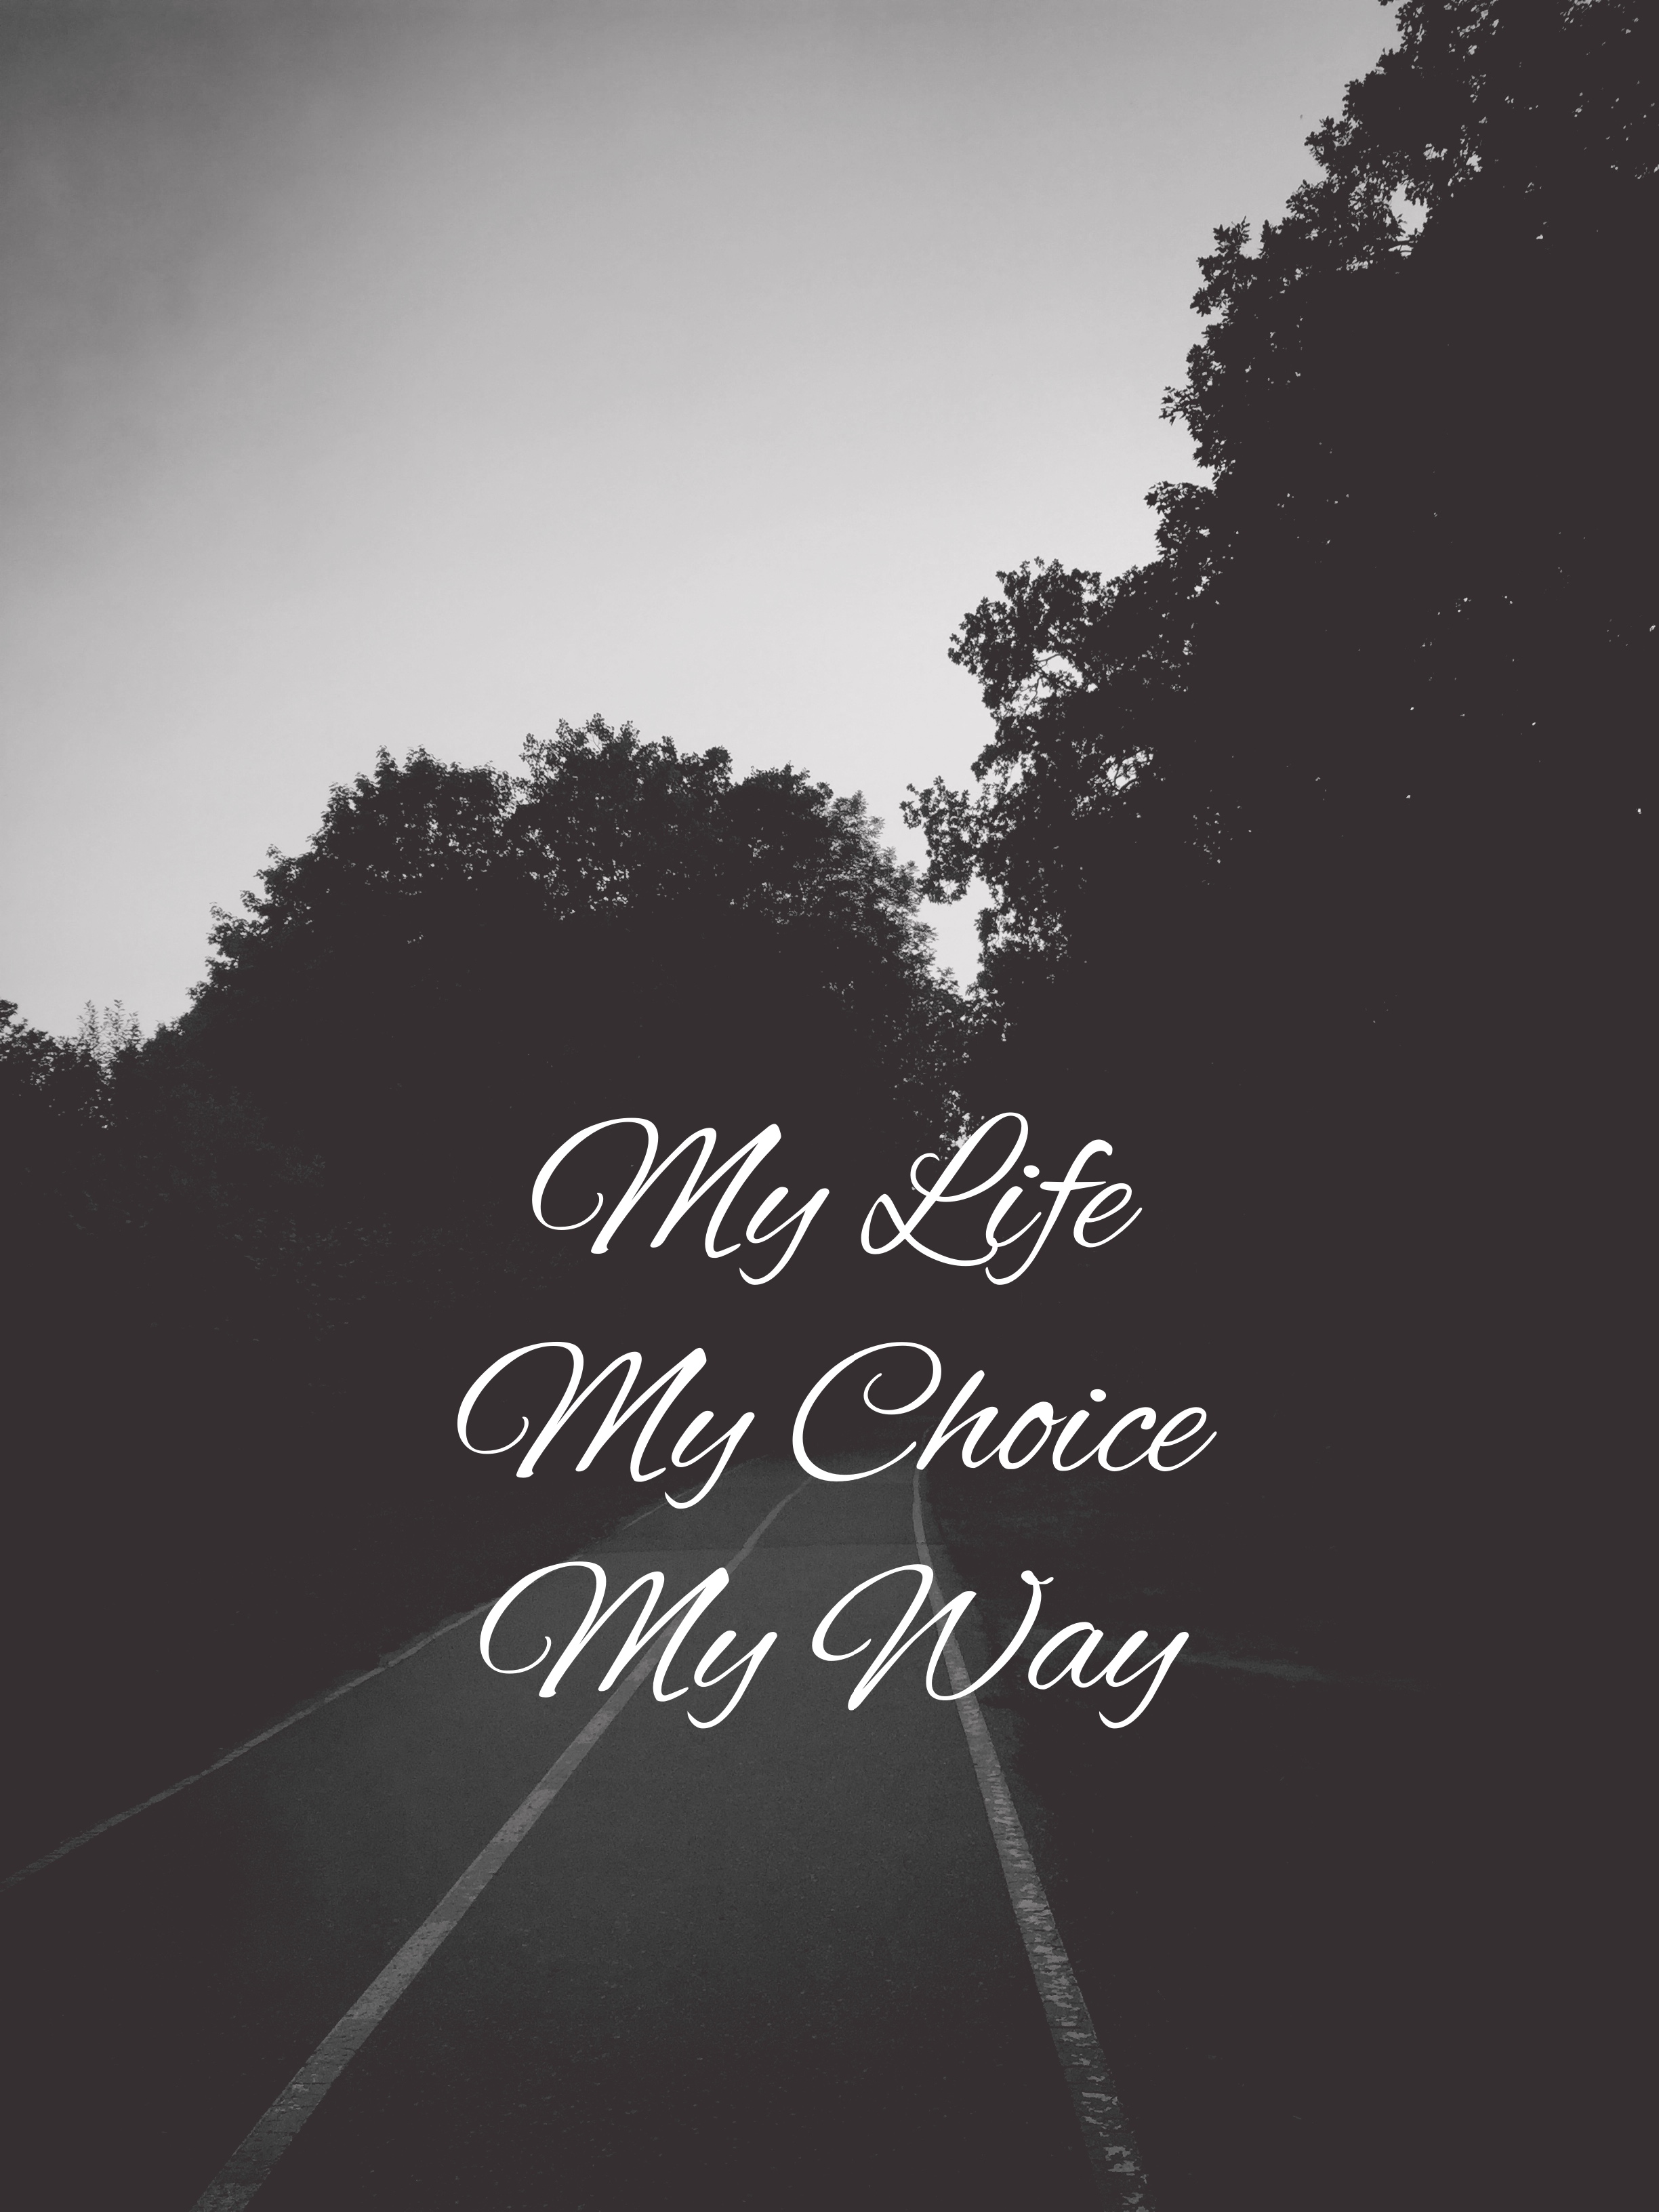 text, bw, quotation, quote, chb, words, inscription, road, path, way Phone Background